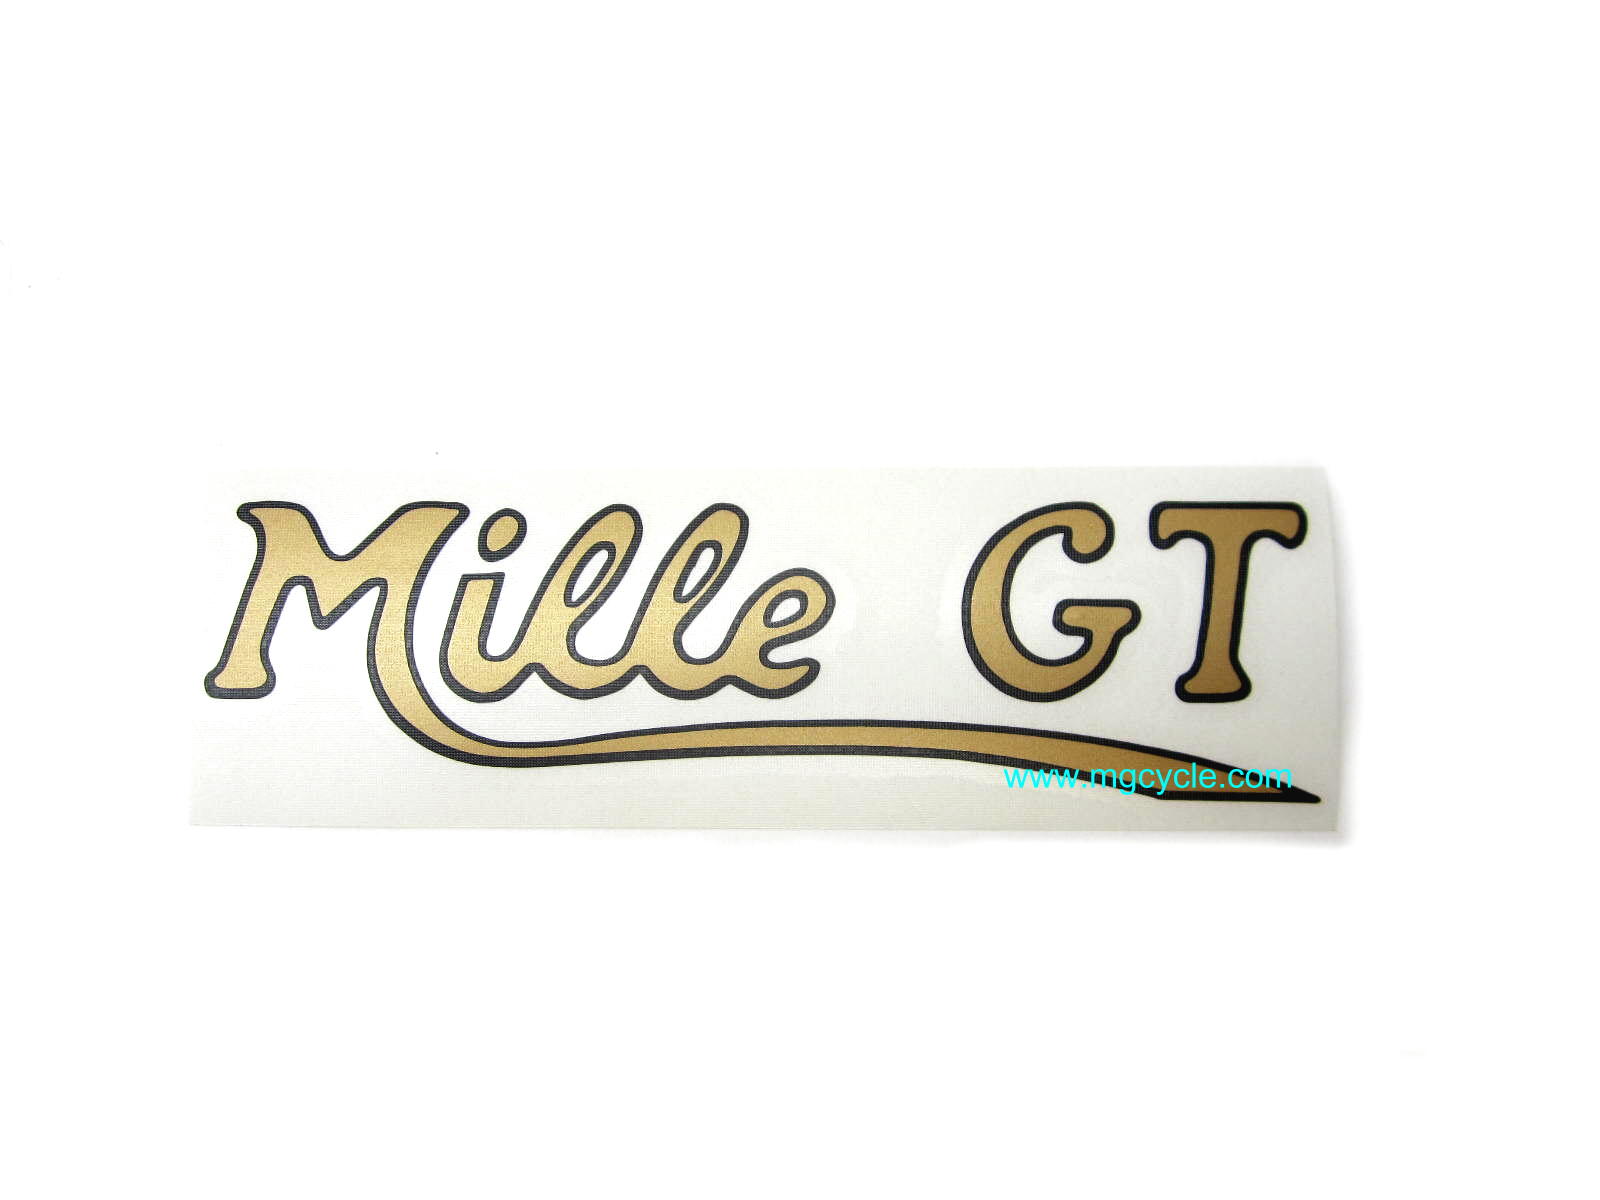 Mille GT side cover decal